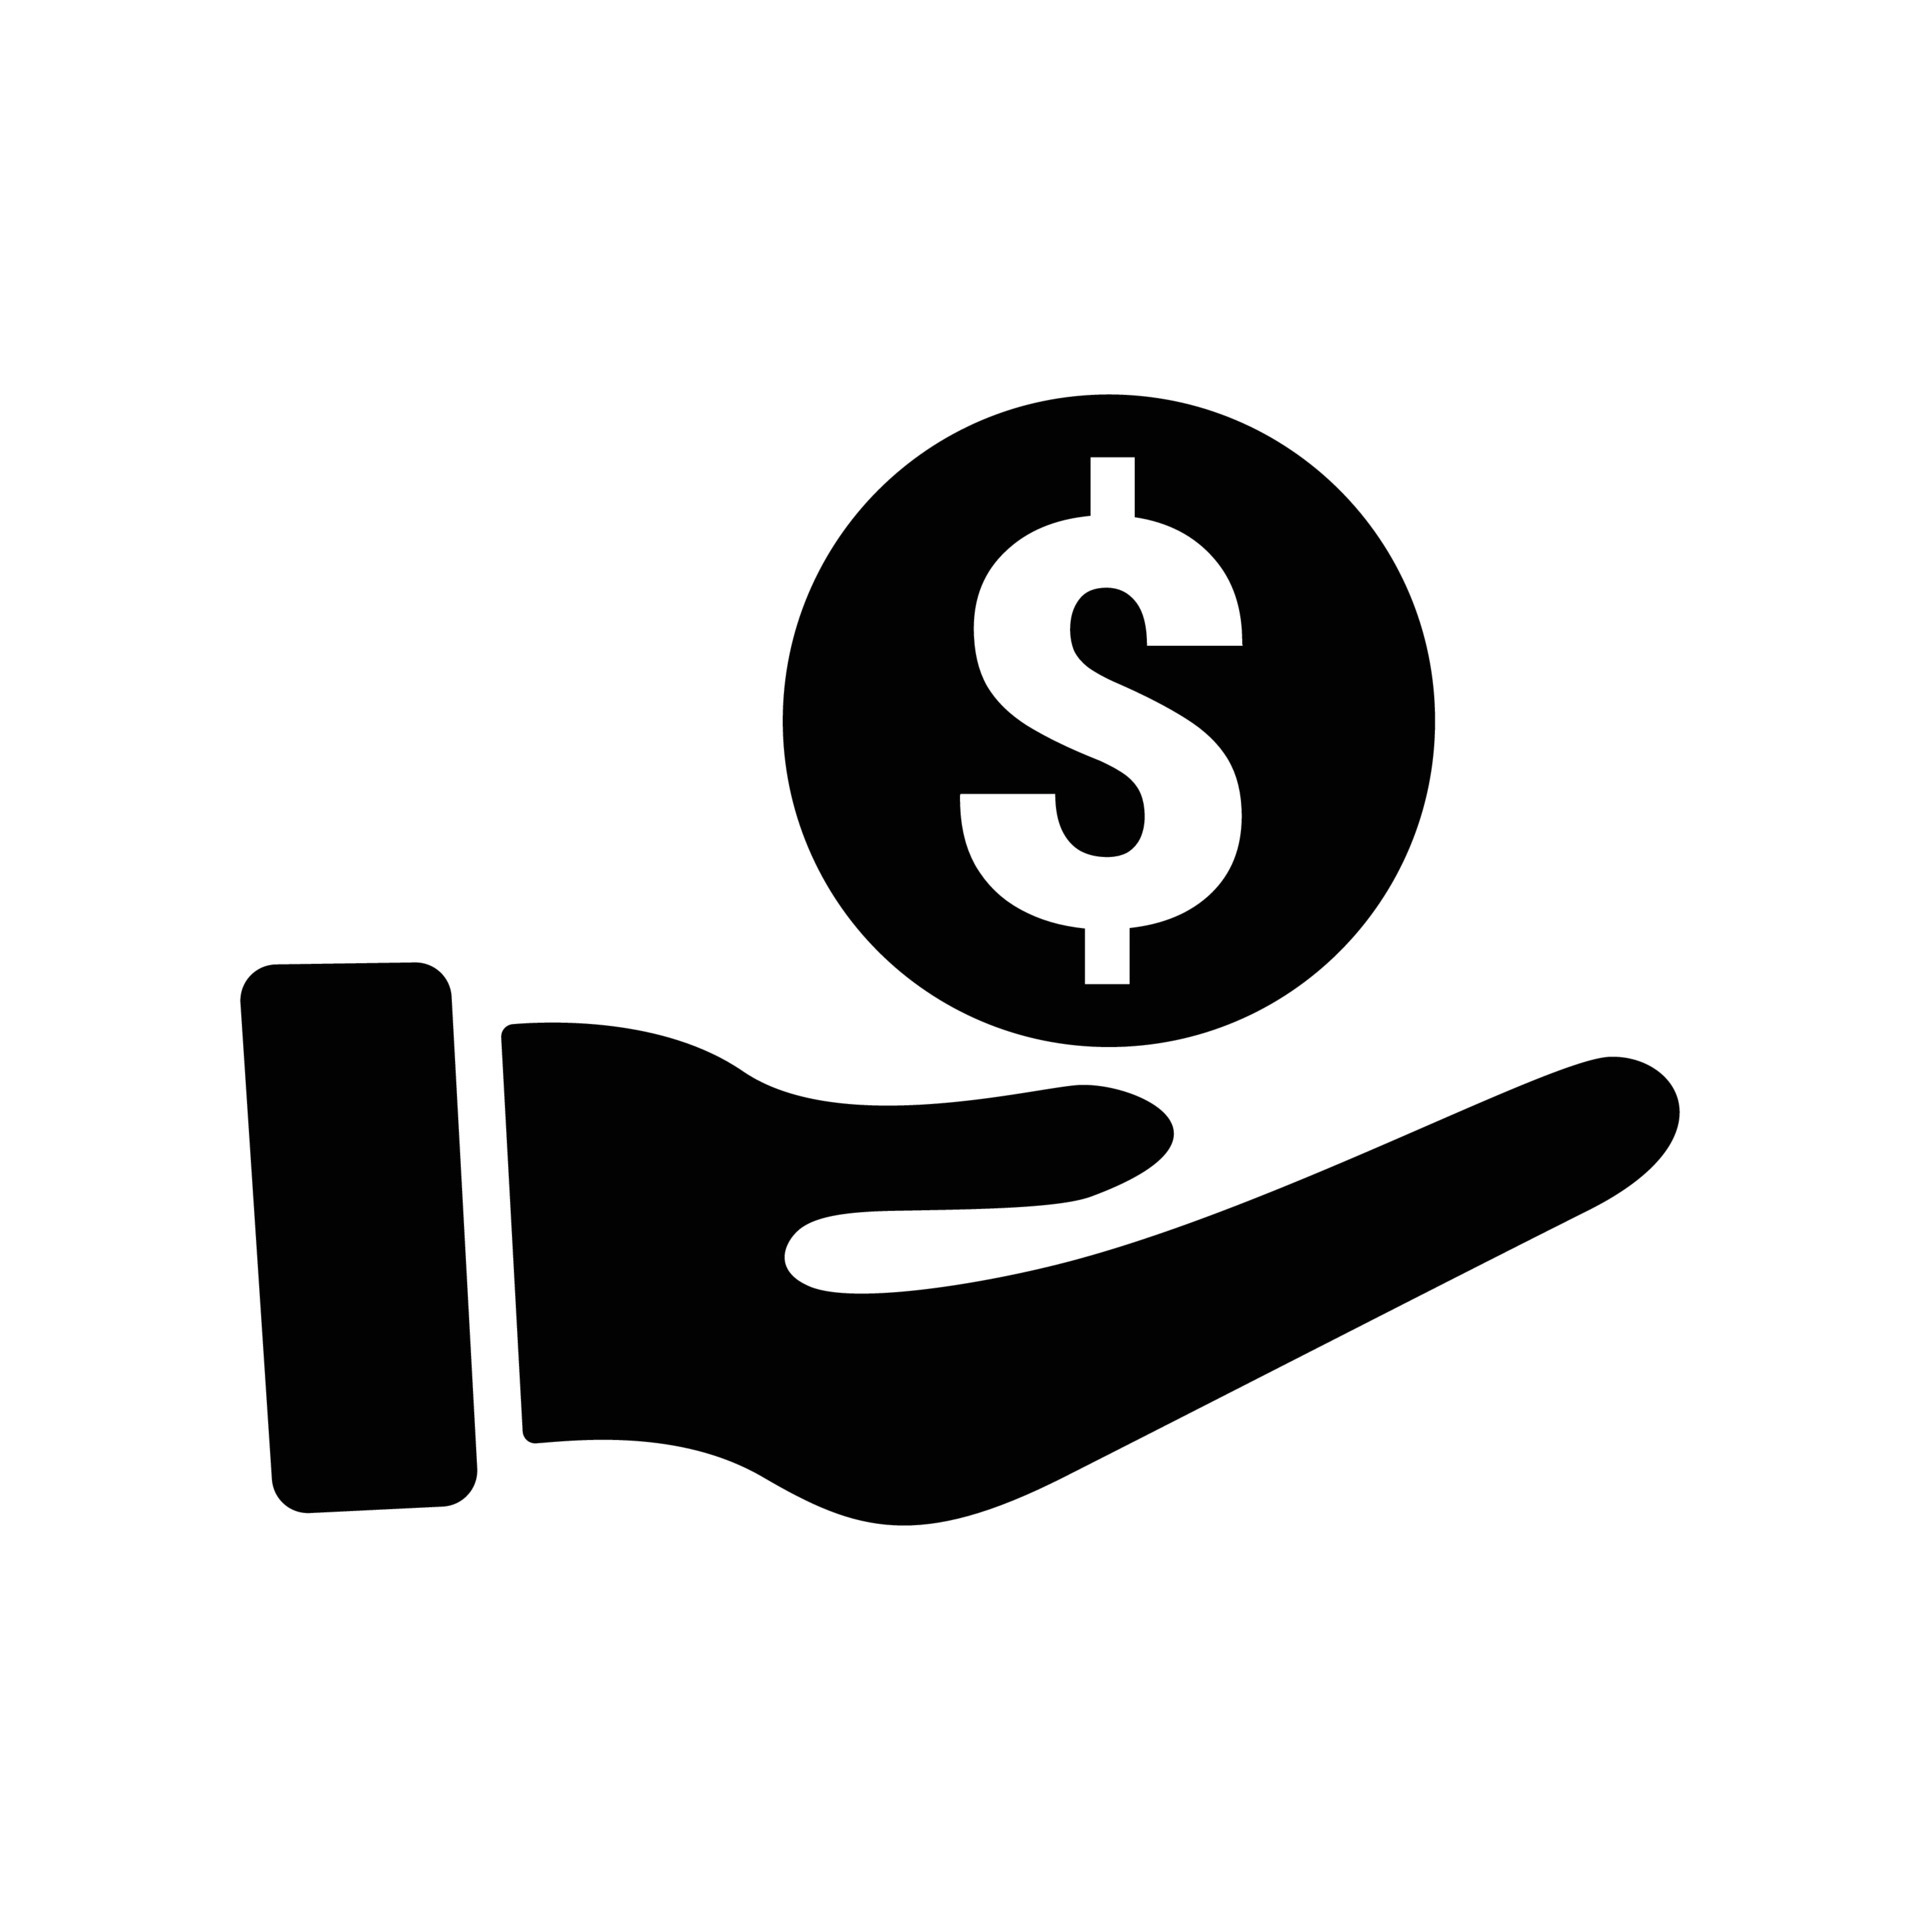 money-in-hand-icon-money-in-hand-sign-and-symbol-free-vector